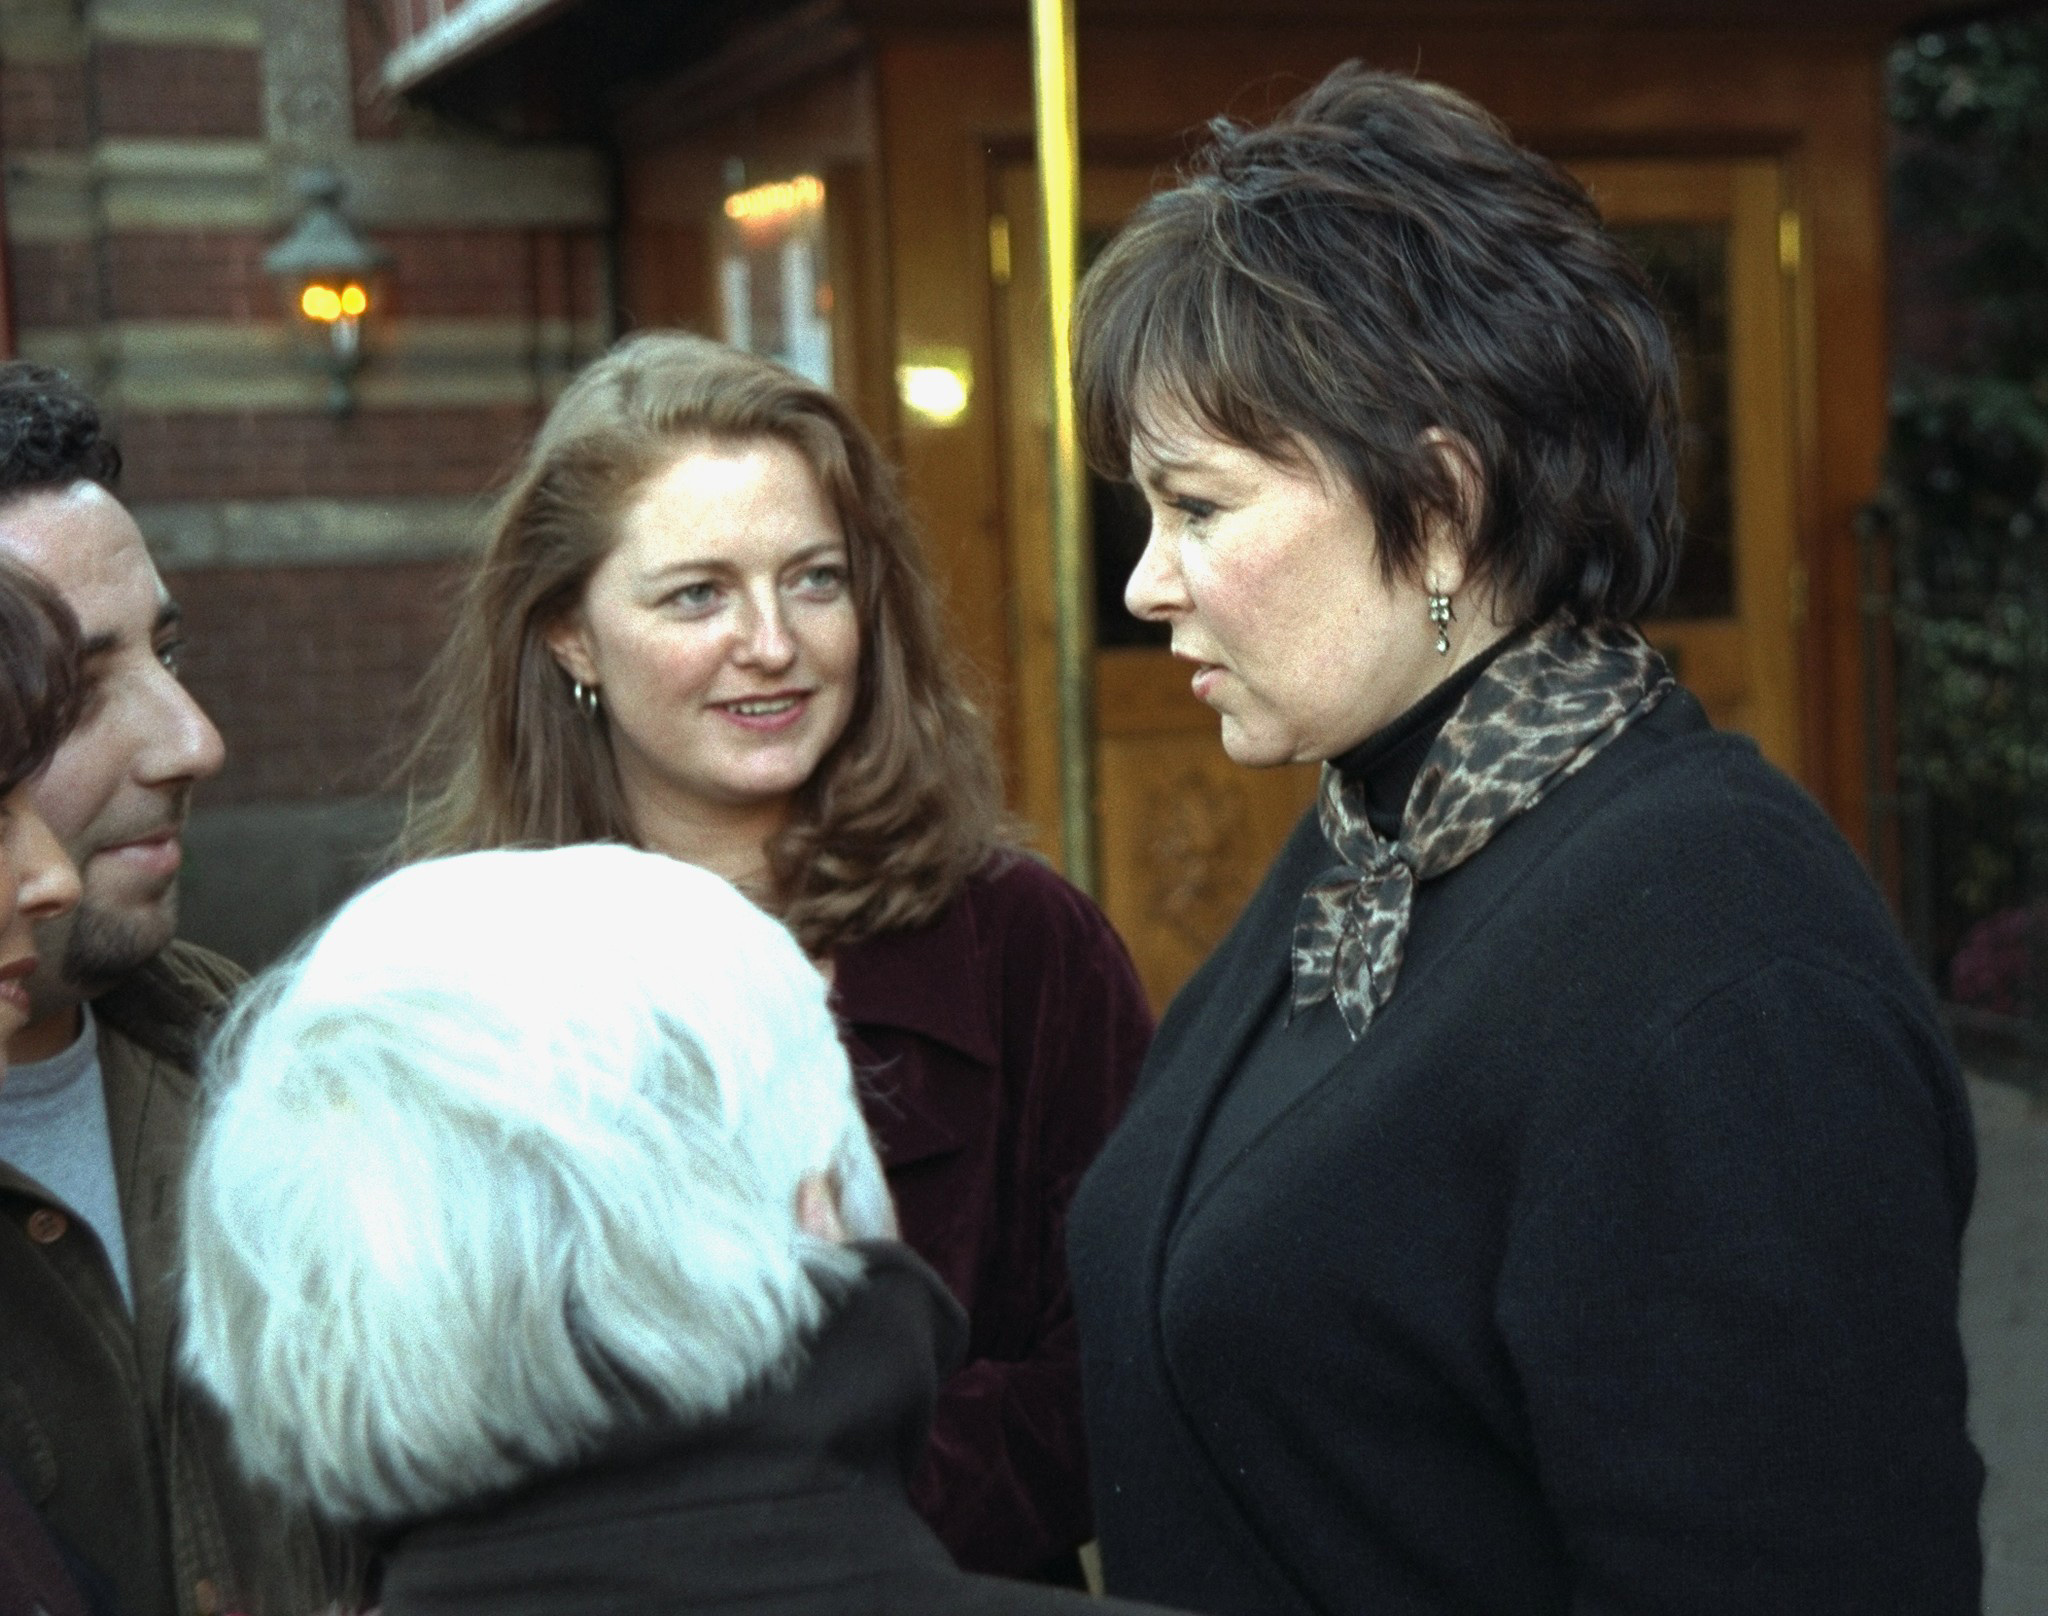 Roseanne Barr (right) meets her fans with daughter Brandy at her side at Tavern on the Green where the "The Roseanne Show" was being filmed. | Source: Getty Images